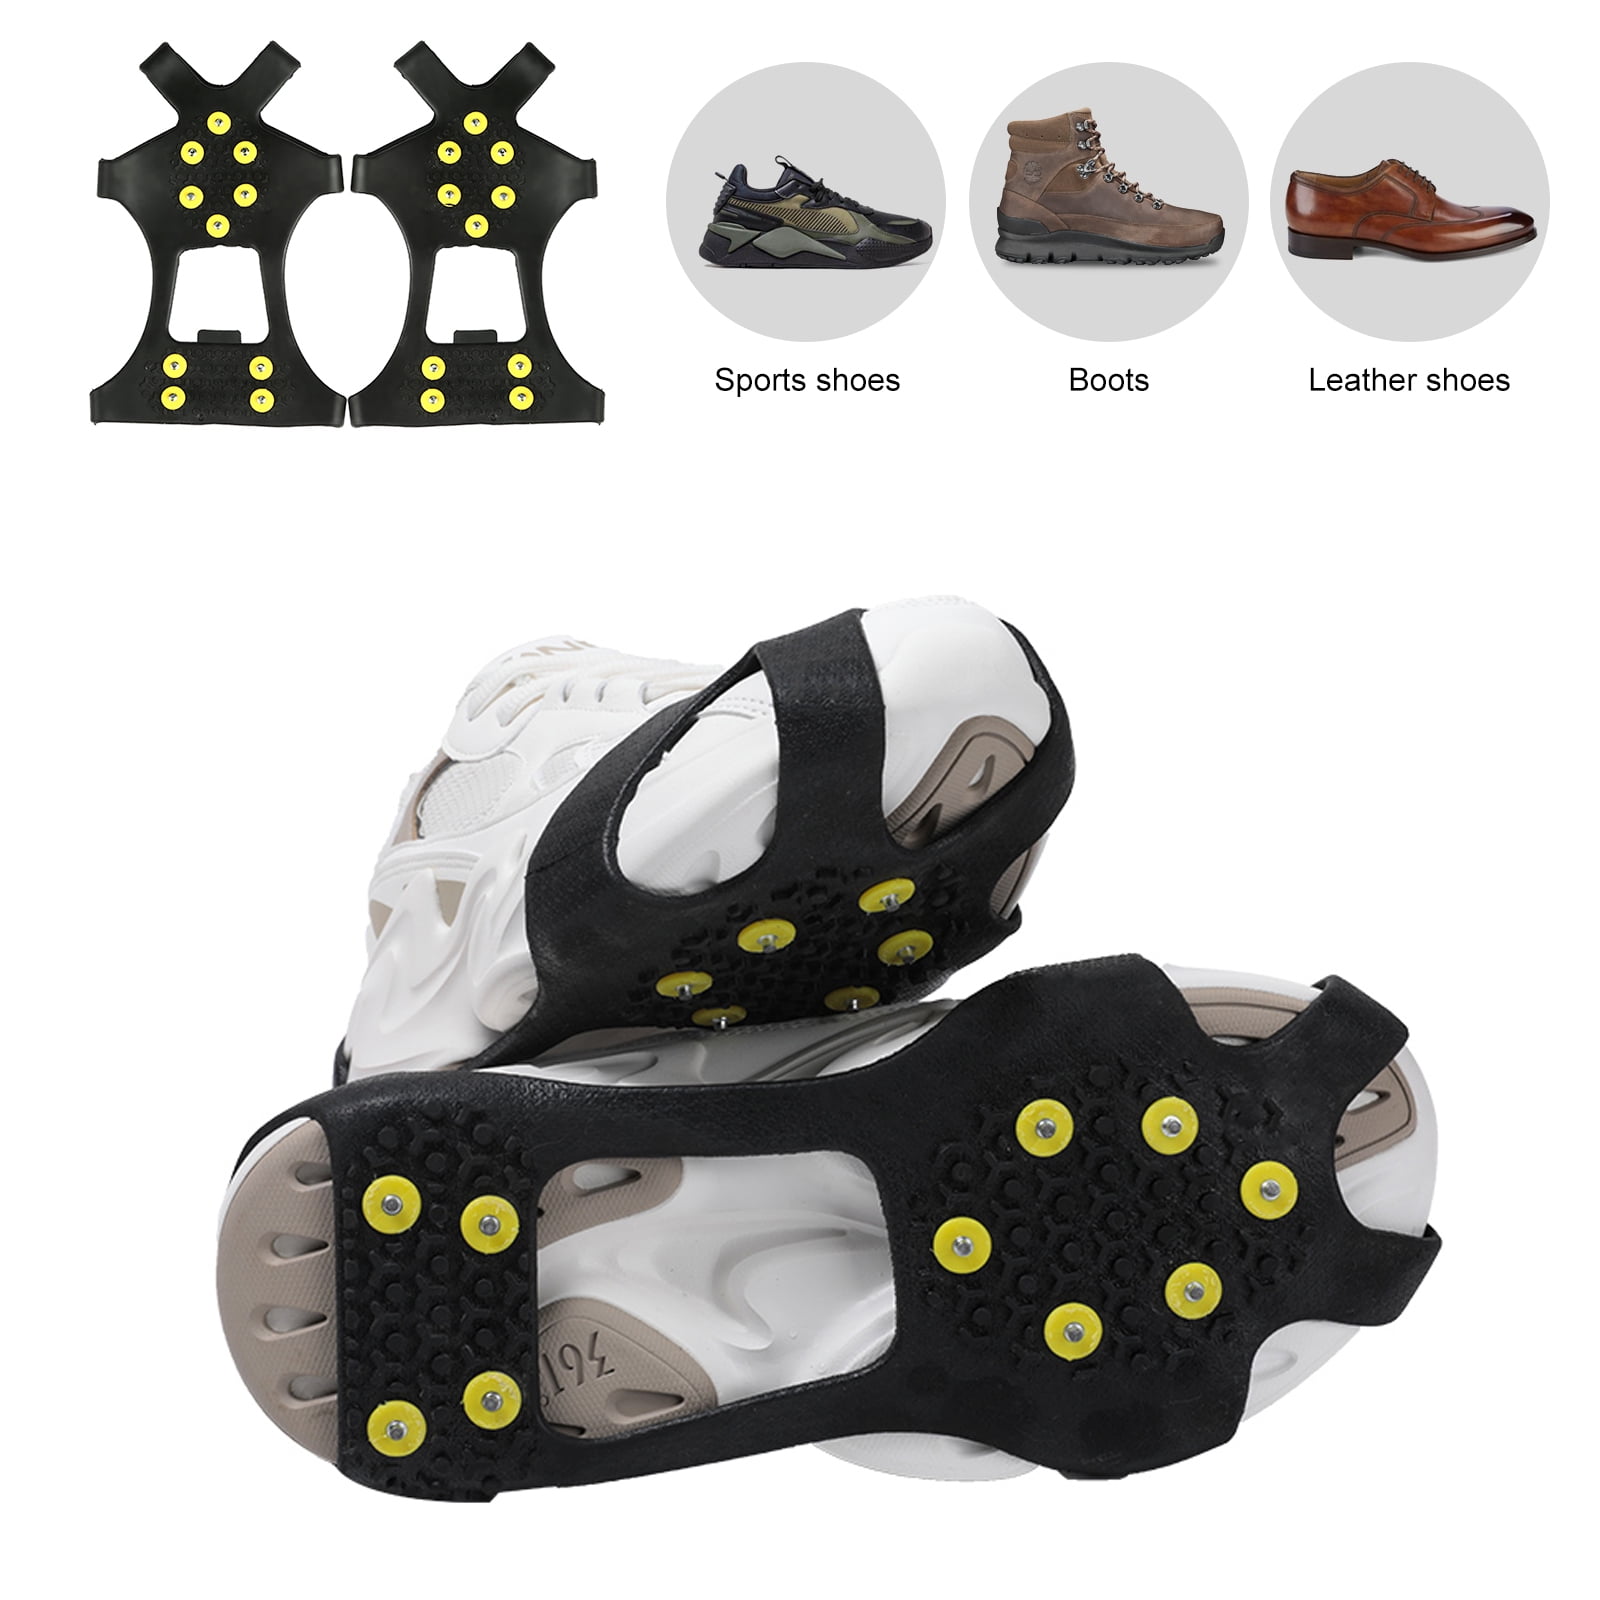 Universal Anti-slip Ice Snow Grips Non Slip Shoes Boots Crampons Cleats 